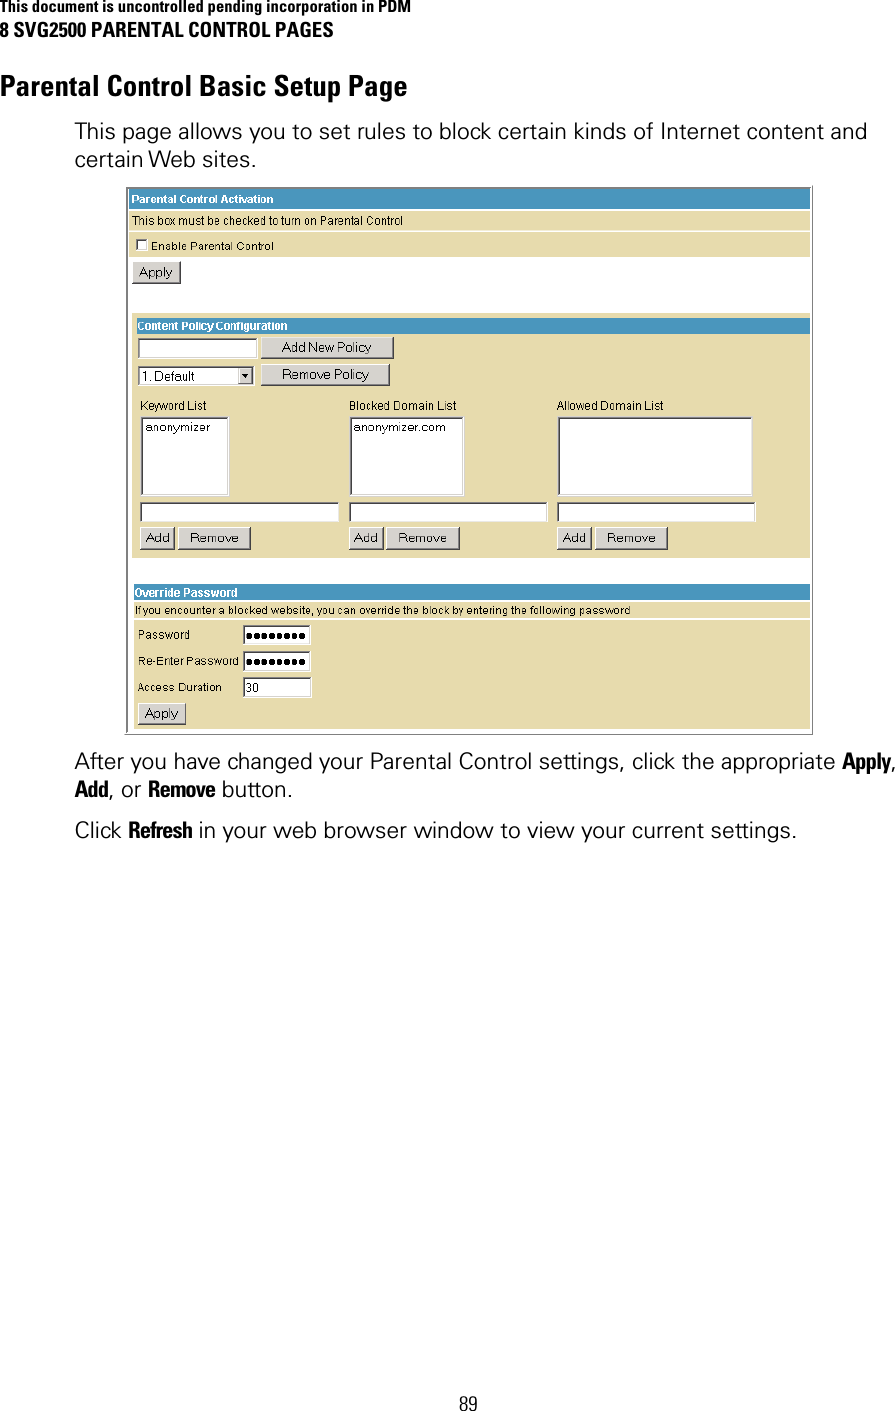 This document is uncontrolled pending incorporation in PDM 8 SVG2500 PARENTAL CONTROL PAGES  89 Parental Control Basic Setup Page This page allows you to set rules to block certain kinds of Internet content and certain Web sites.   After you have changed your Parental Control settings, click the appropriate Apply, Add, or Remove button.  Click Refresh in your web browser window to view your current settings. 